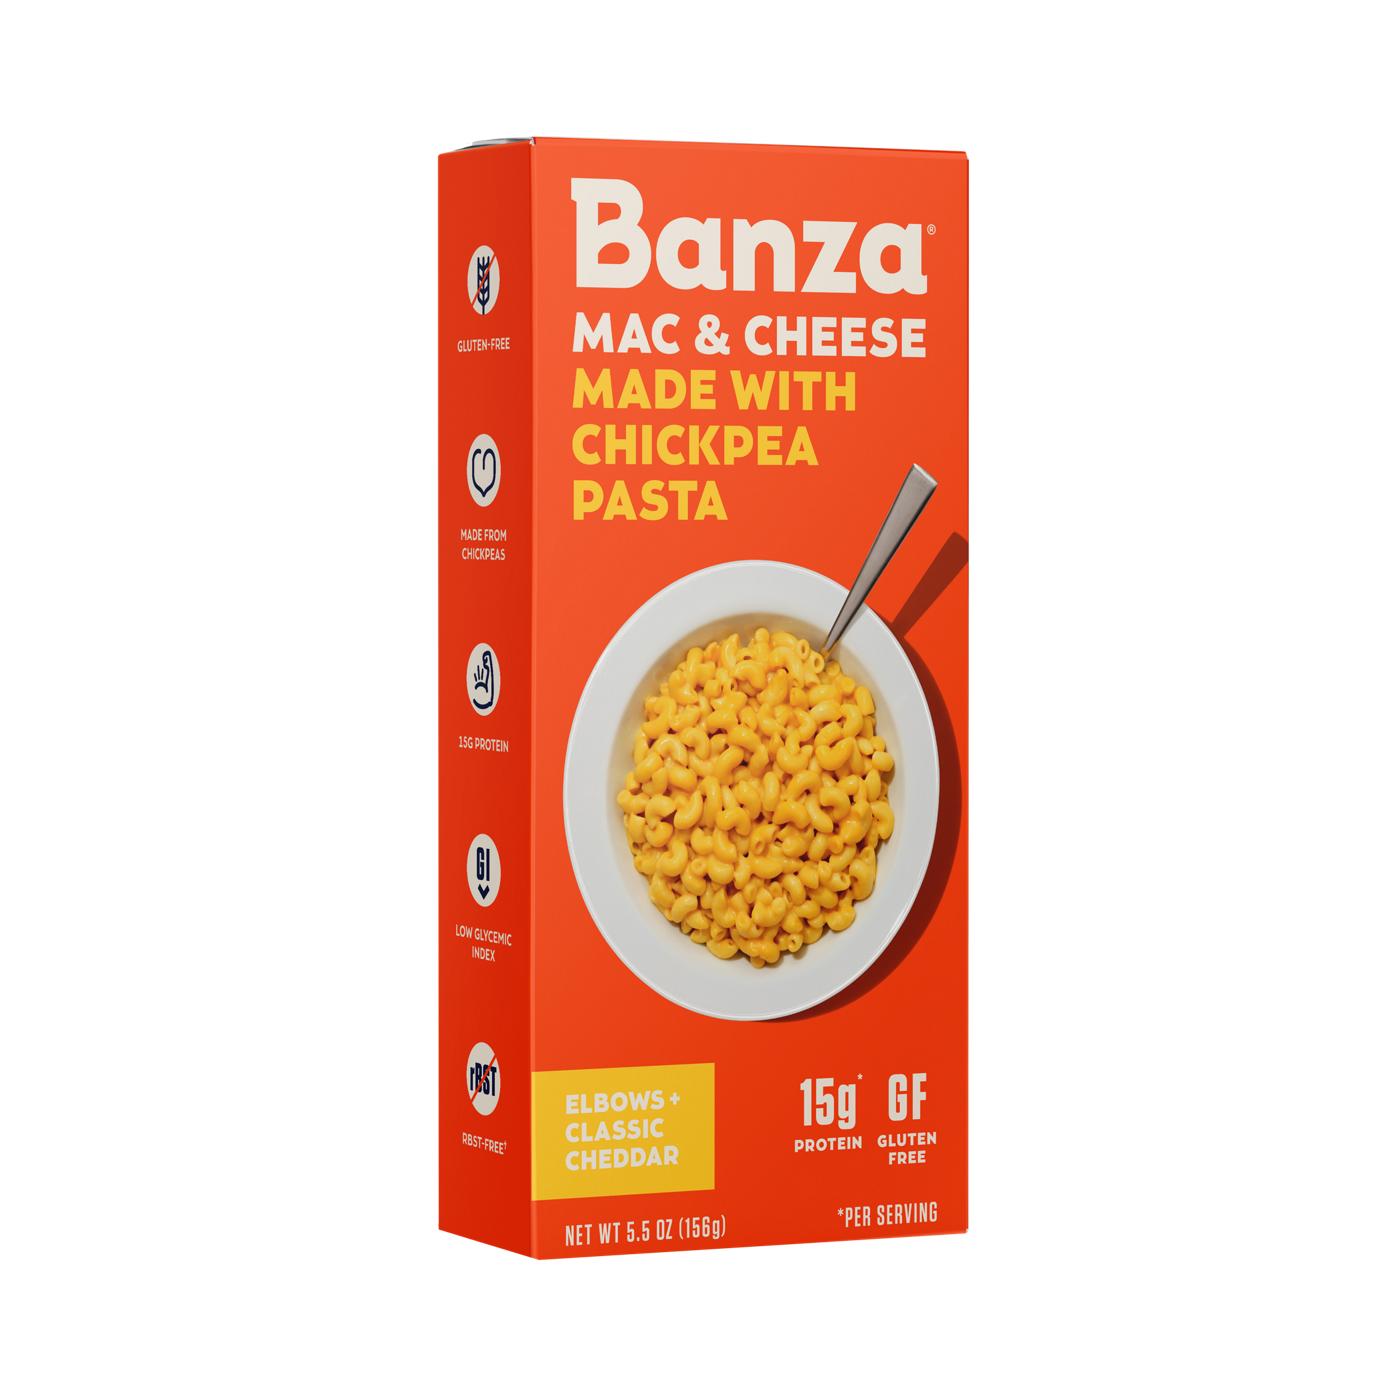 Banza Chickpea Pasta Mac & Classic Cheddar Cheese; image 1 of 2